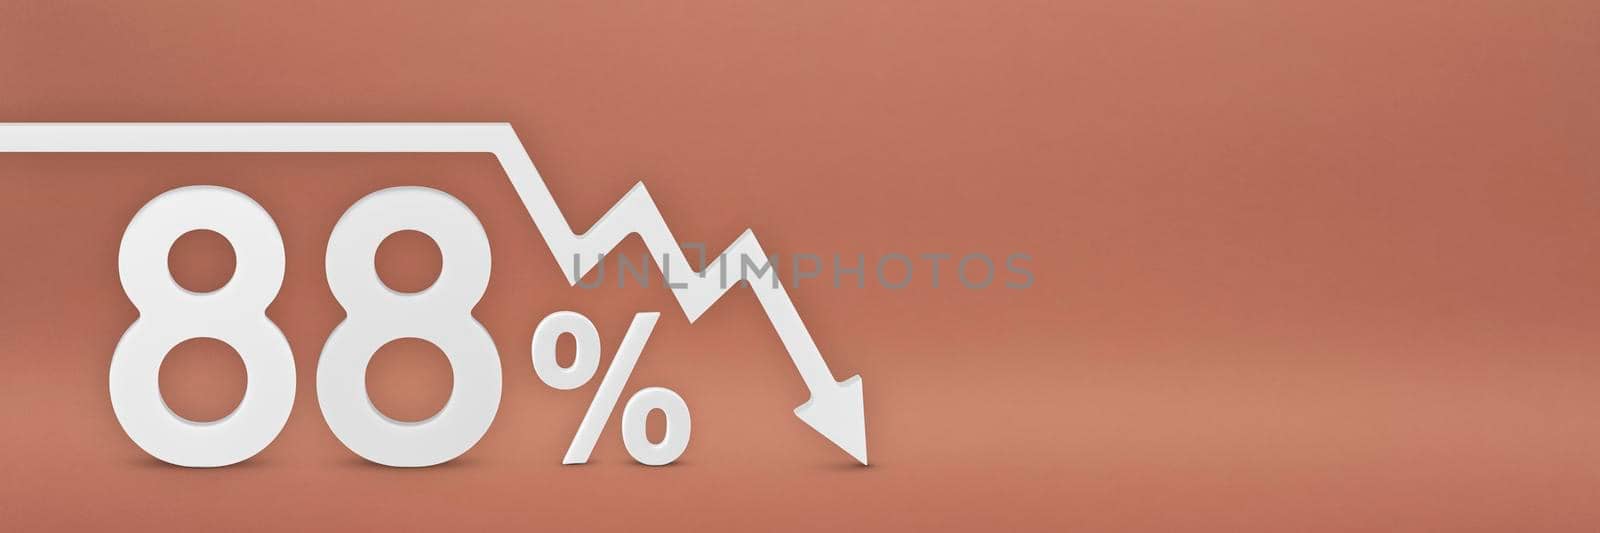 eighty-eight percent, the arrow on the graph is pointing down. Stock market crash, bear market, inflation.Economic collapse, collapse of stocks.3d banner,88 percent discount sign on a red background. by SERSOL